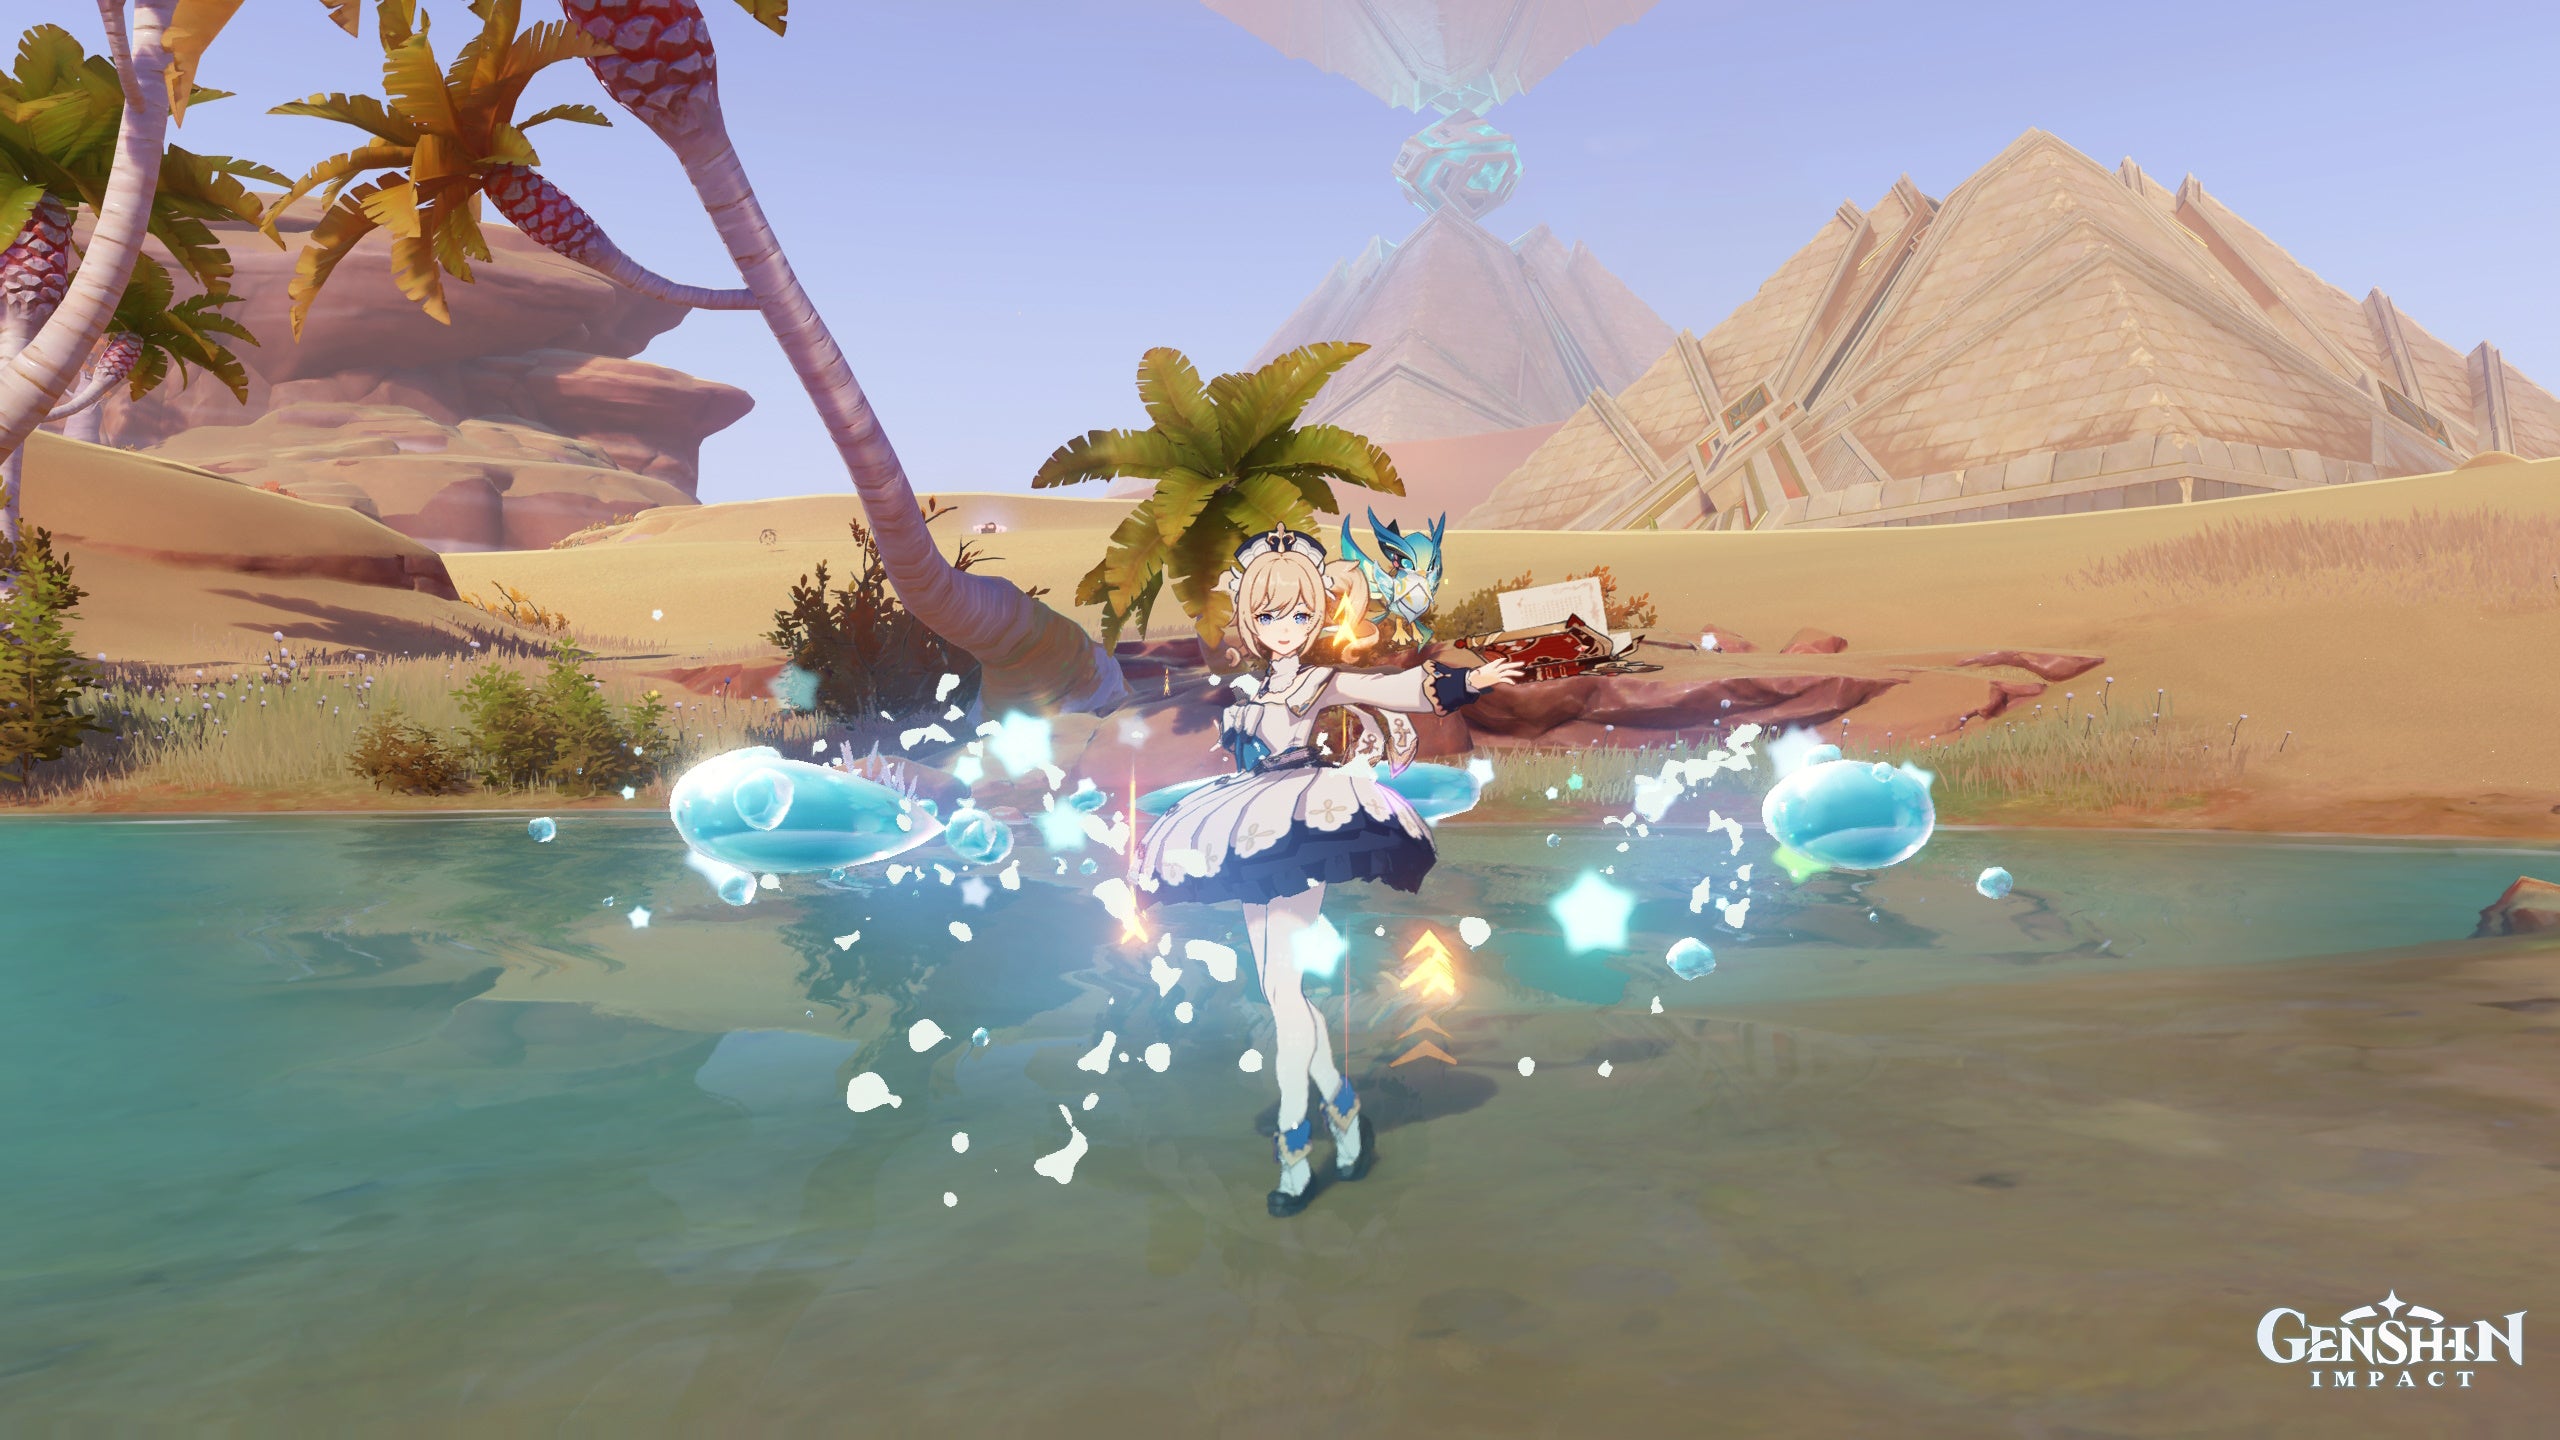 Genshin Impact Barbara materials: An anime girl with straw-colored hair in pigtails, wearing a pointed cap and dove-grey dress, is standing in an oasis with sparkling bubbles around her